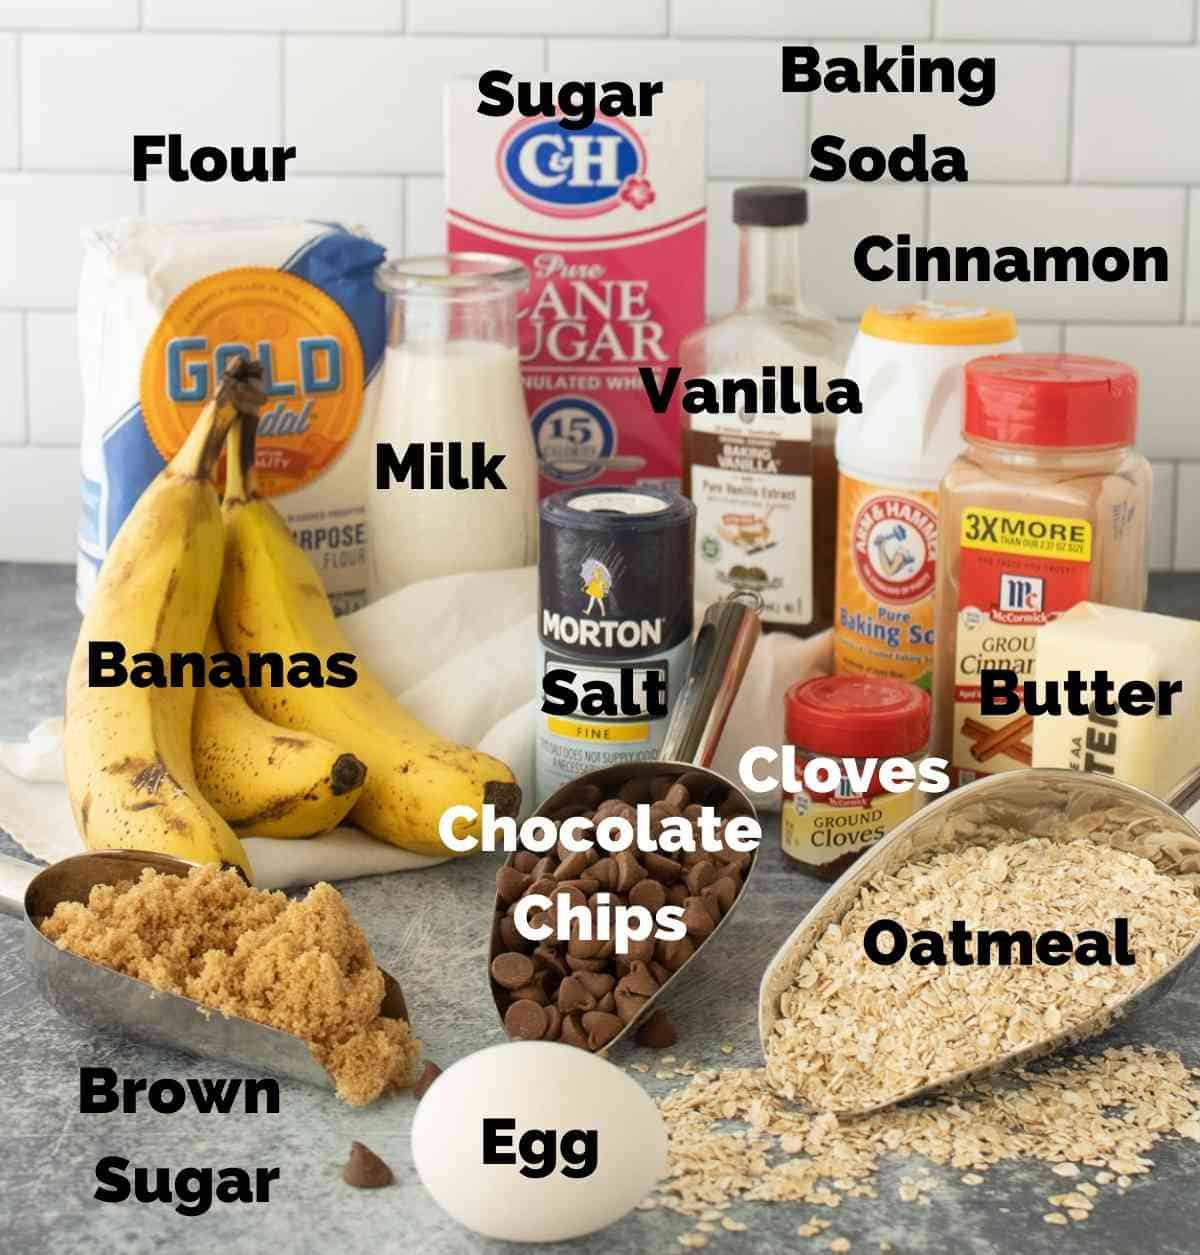 Ingredients for banana oatmeal chocolate chip cookies.